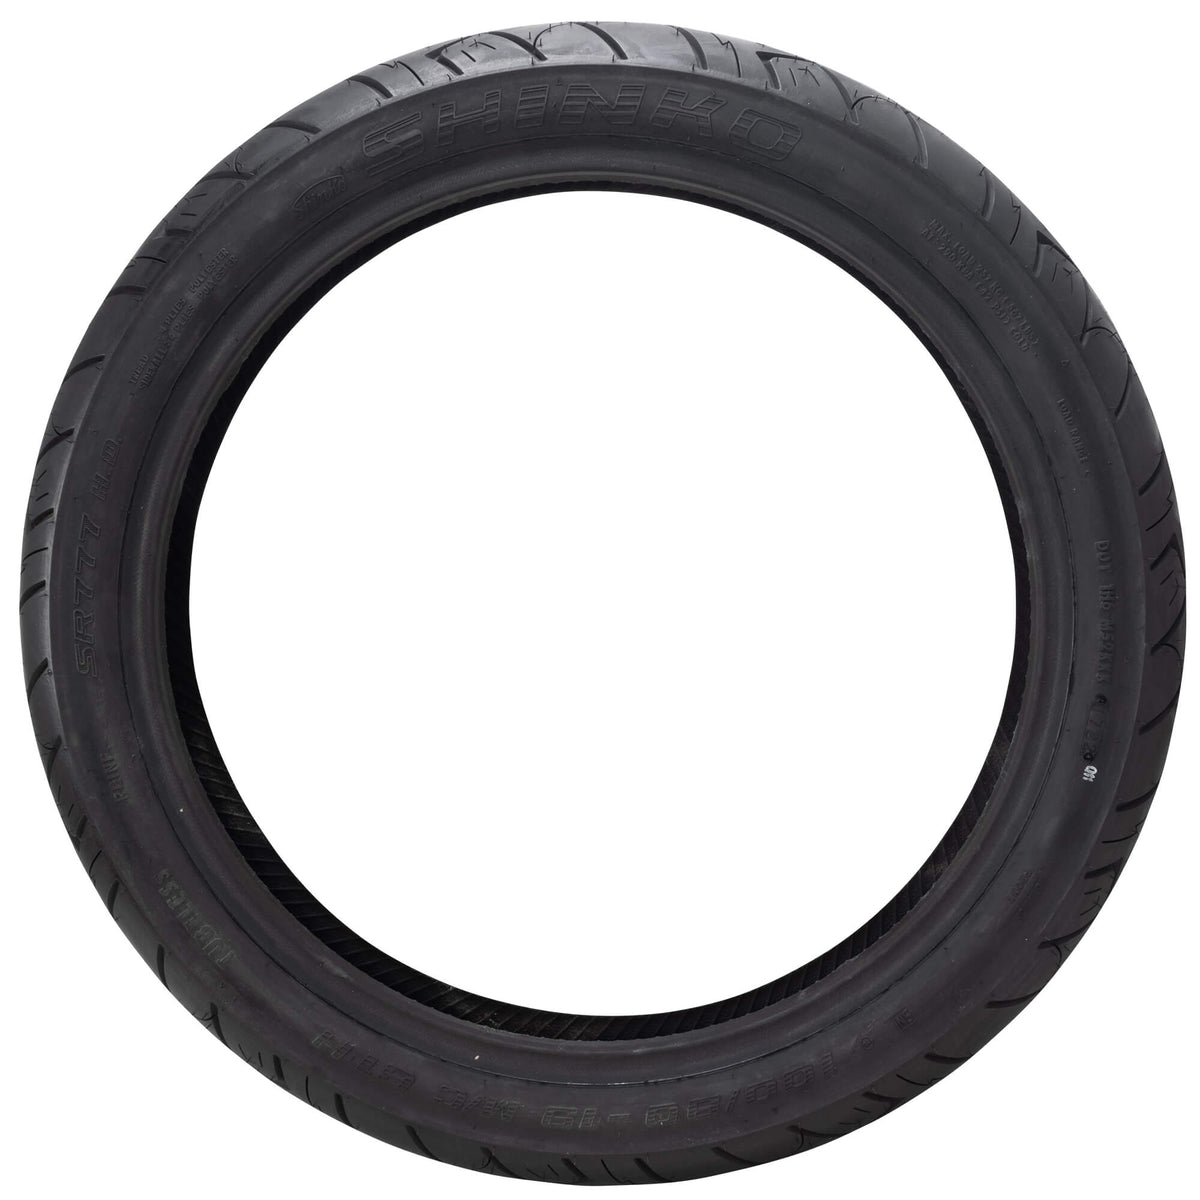 2 shinko tires 100/90-19 and 100/90-15 for Sale in Homer Glen, IL